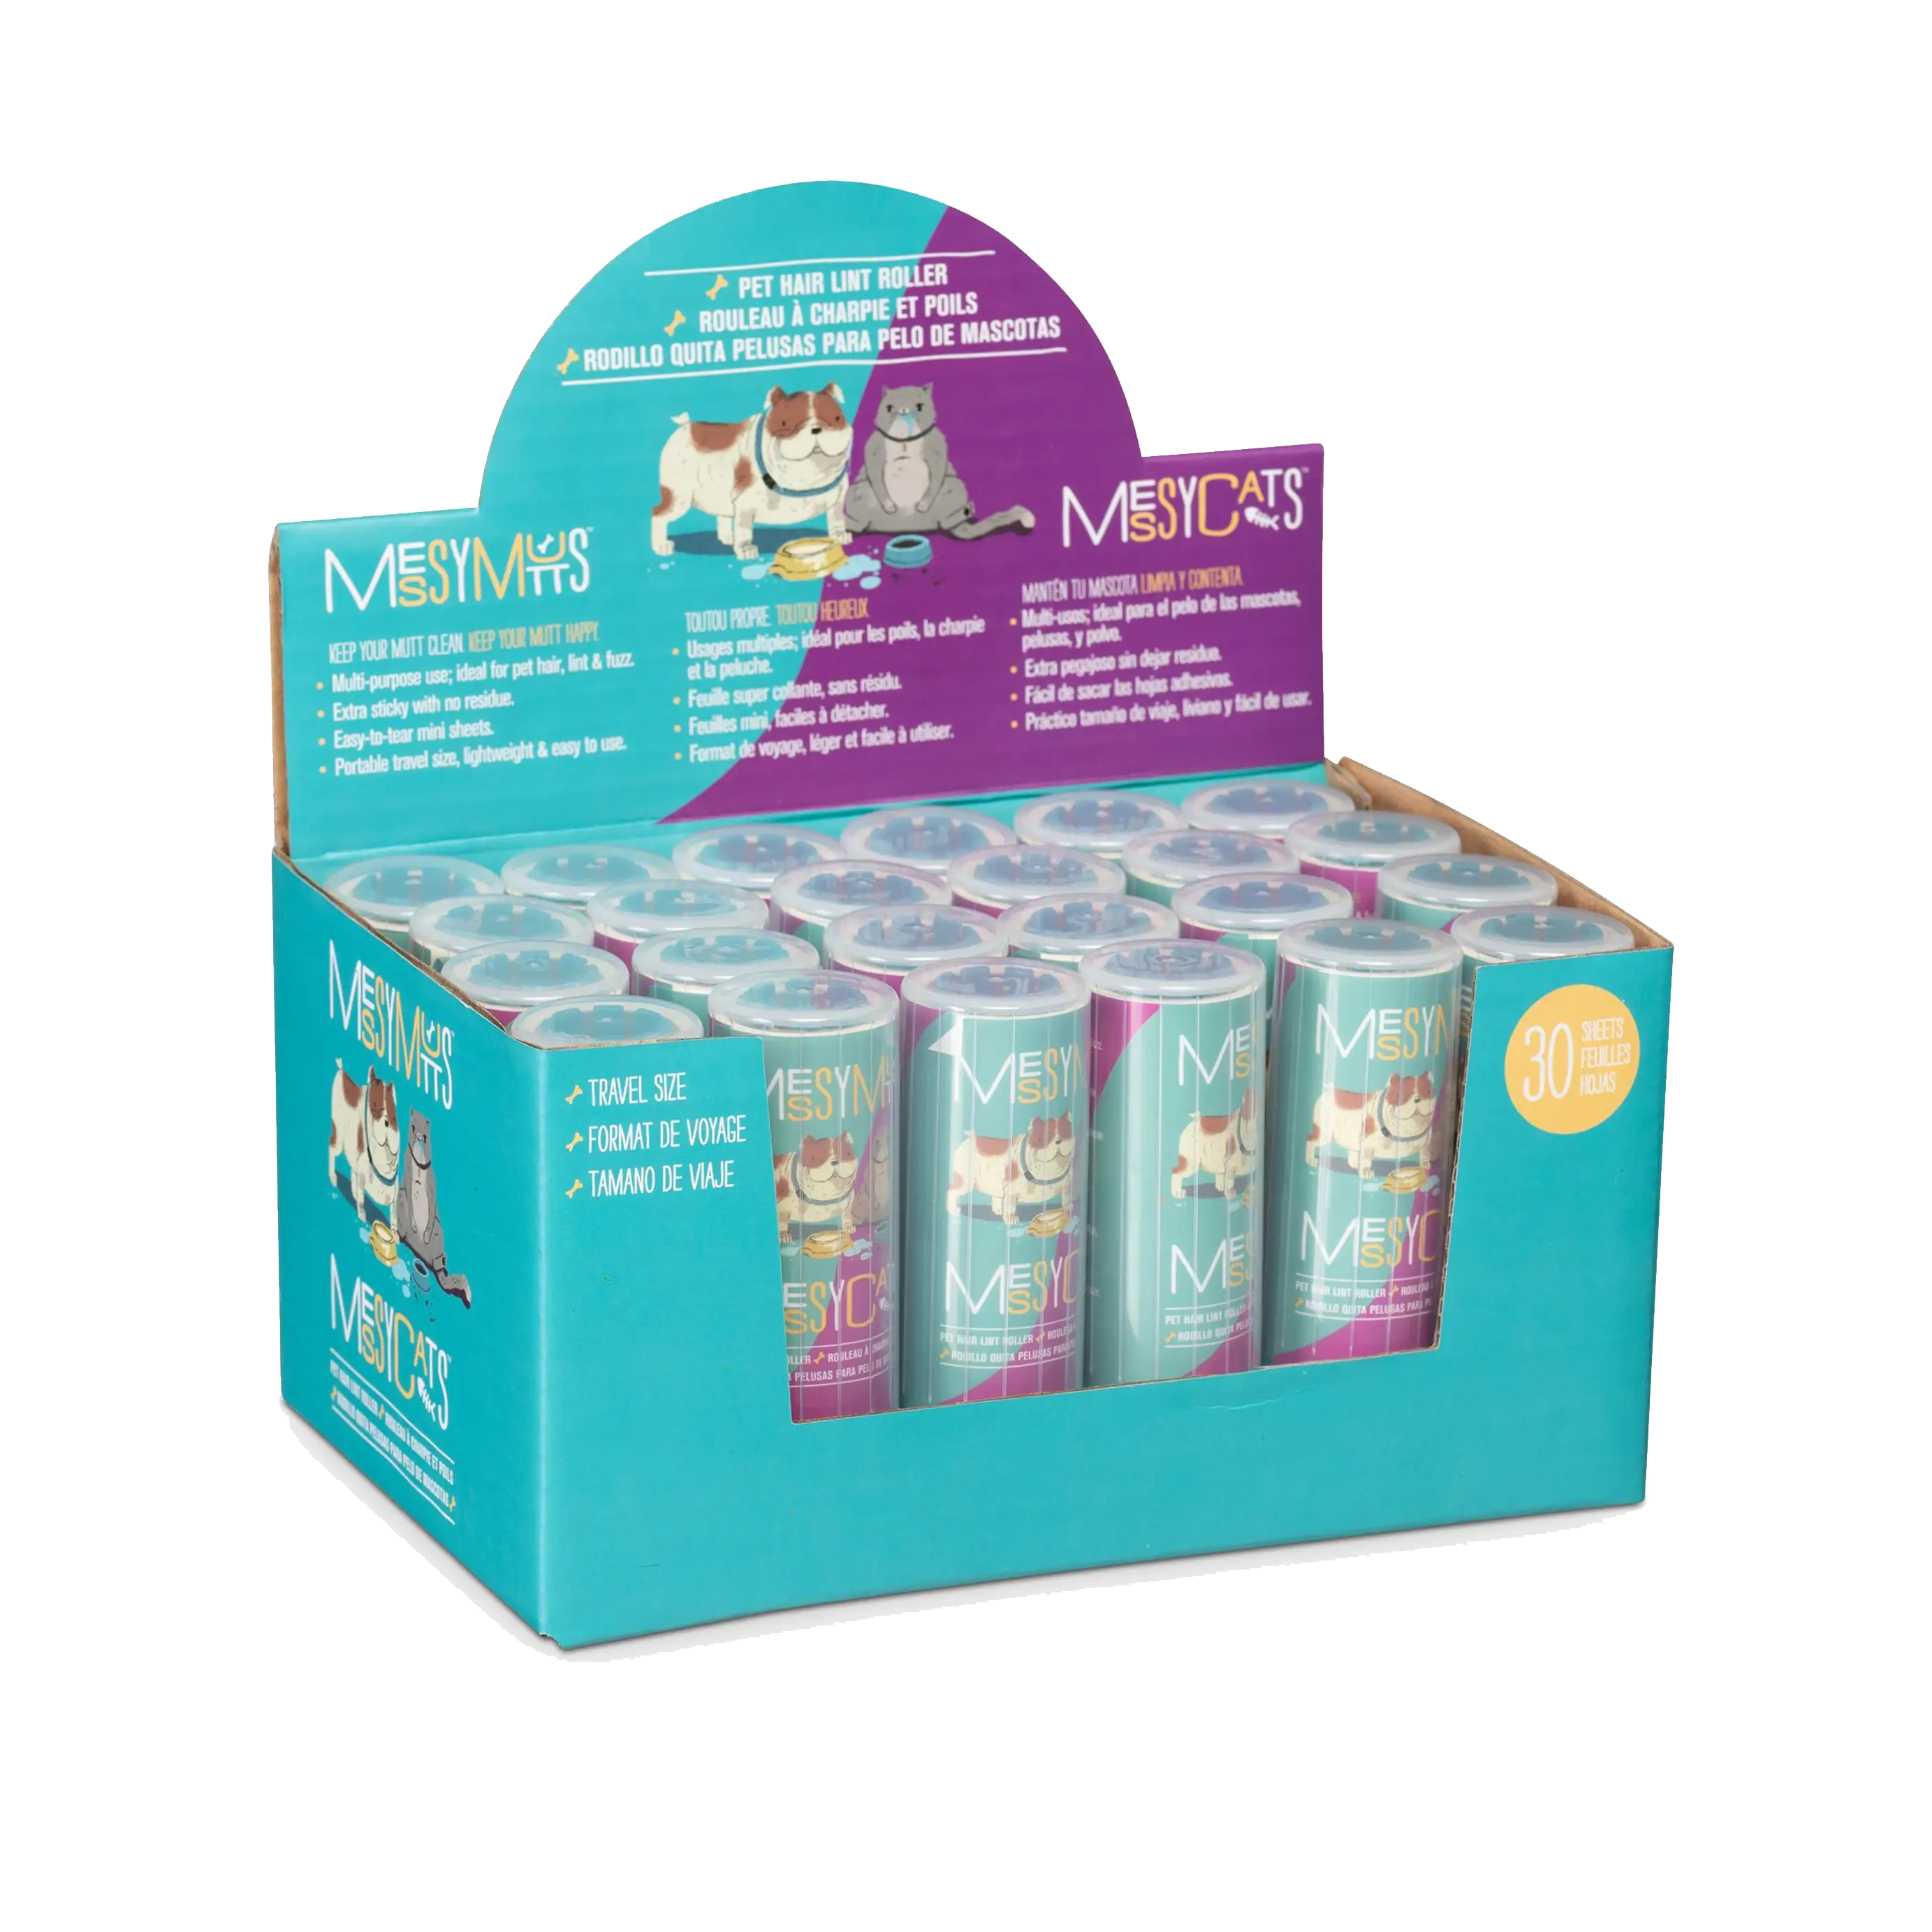 Messy Mutts Pet Hair Lint Rollers- Each